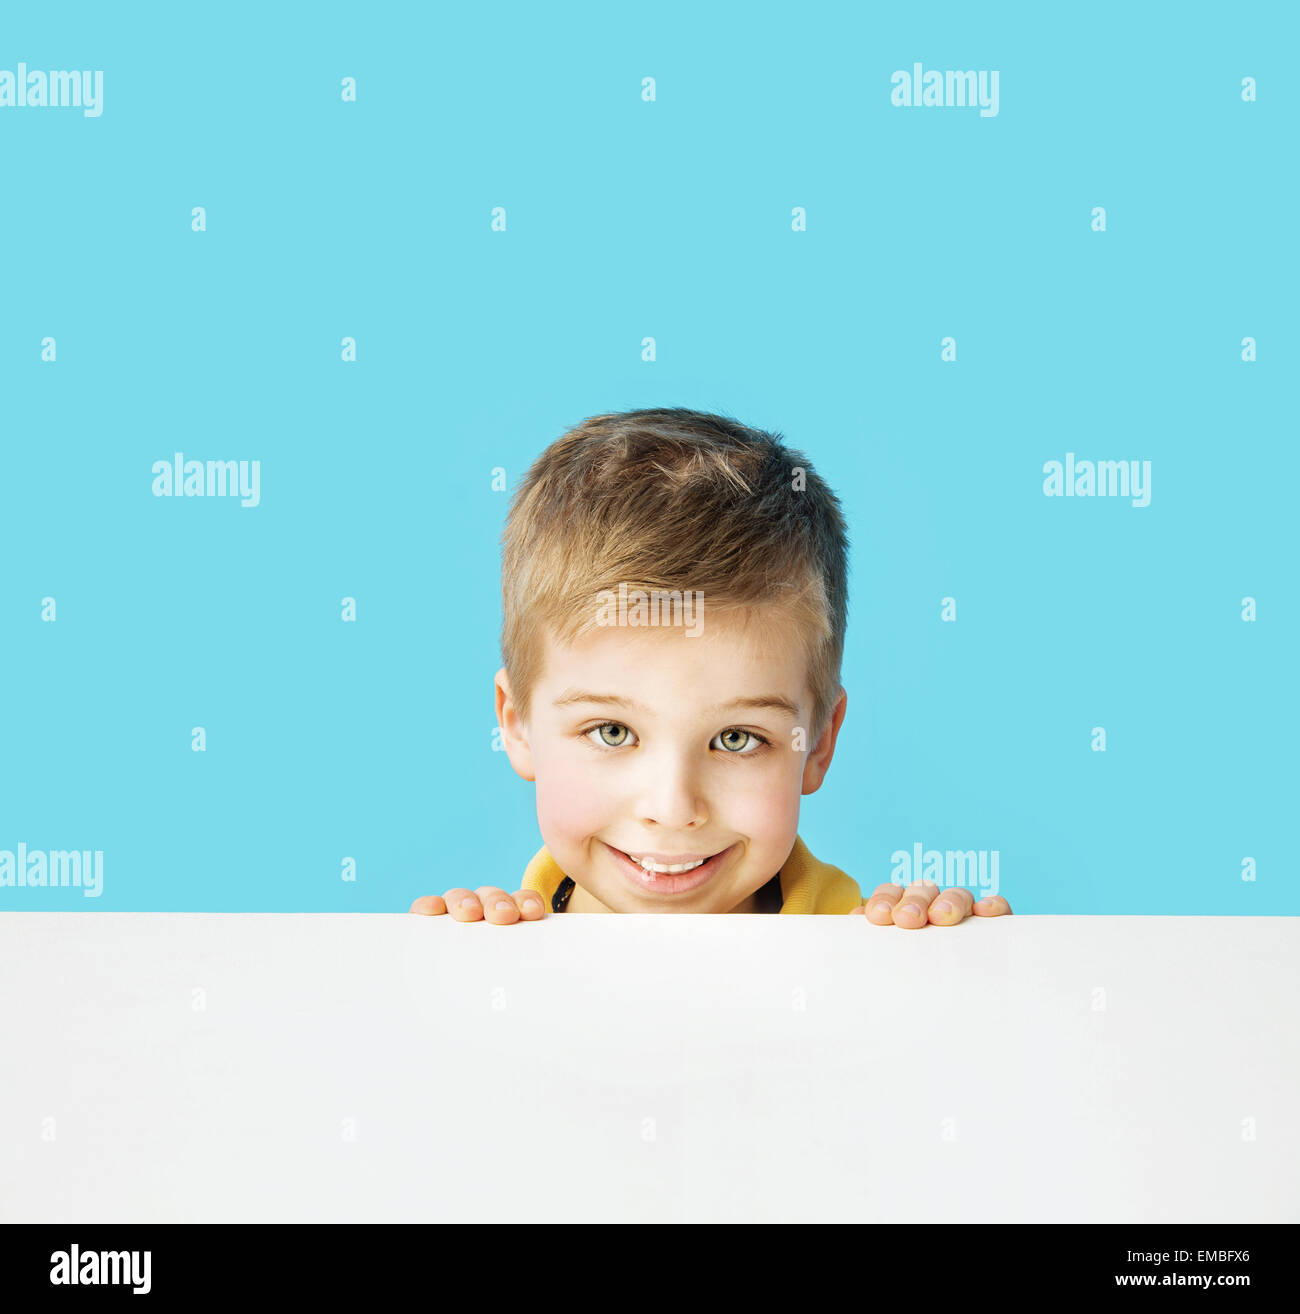 Small and cute smiling boy making faces Stock Photo